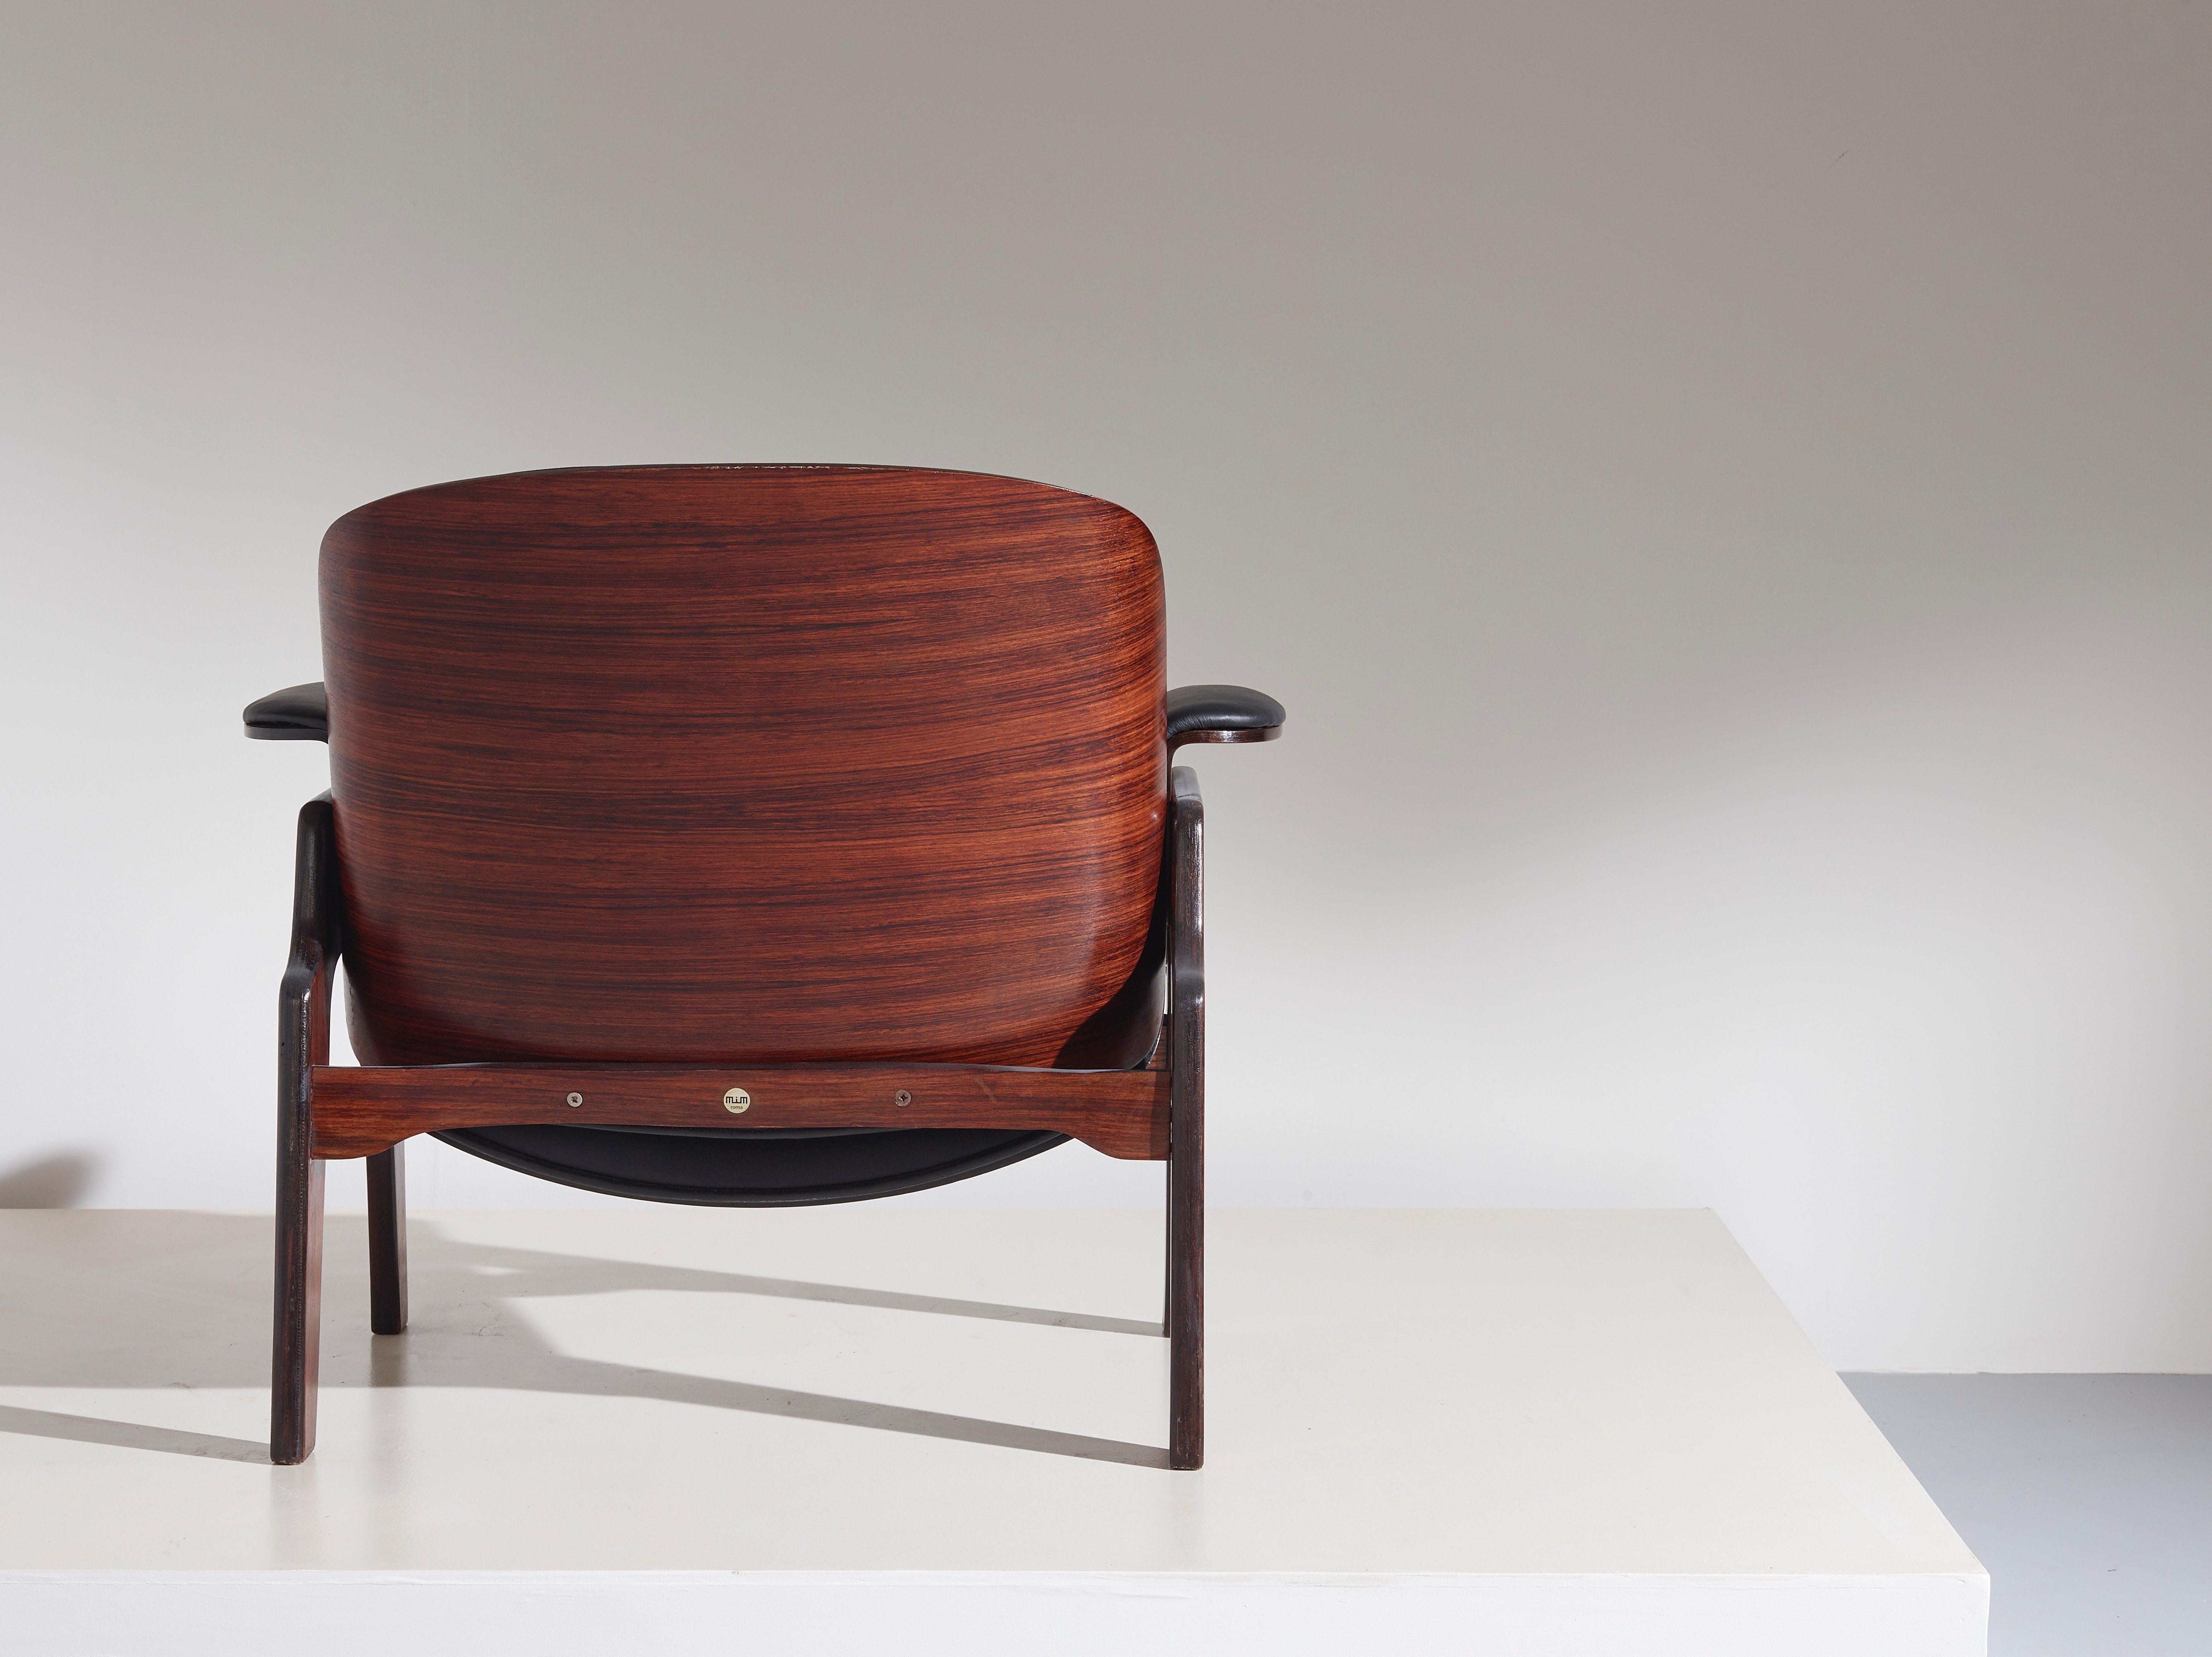 Midcentury Armchair by Ico Parisi for Mim Roma Made by Wood and Black Leather 1